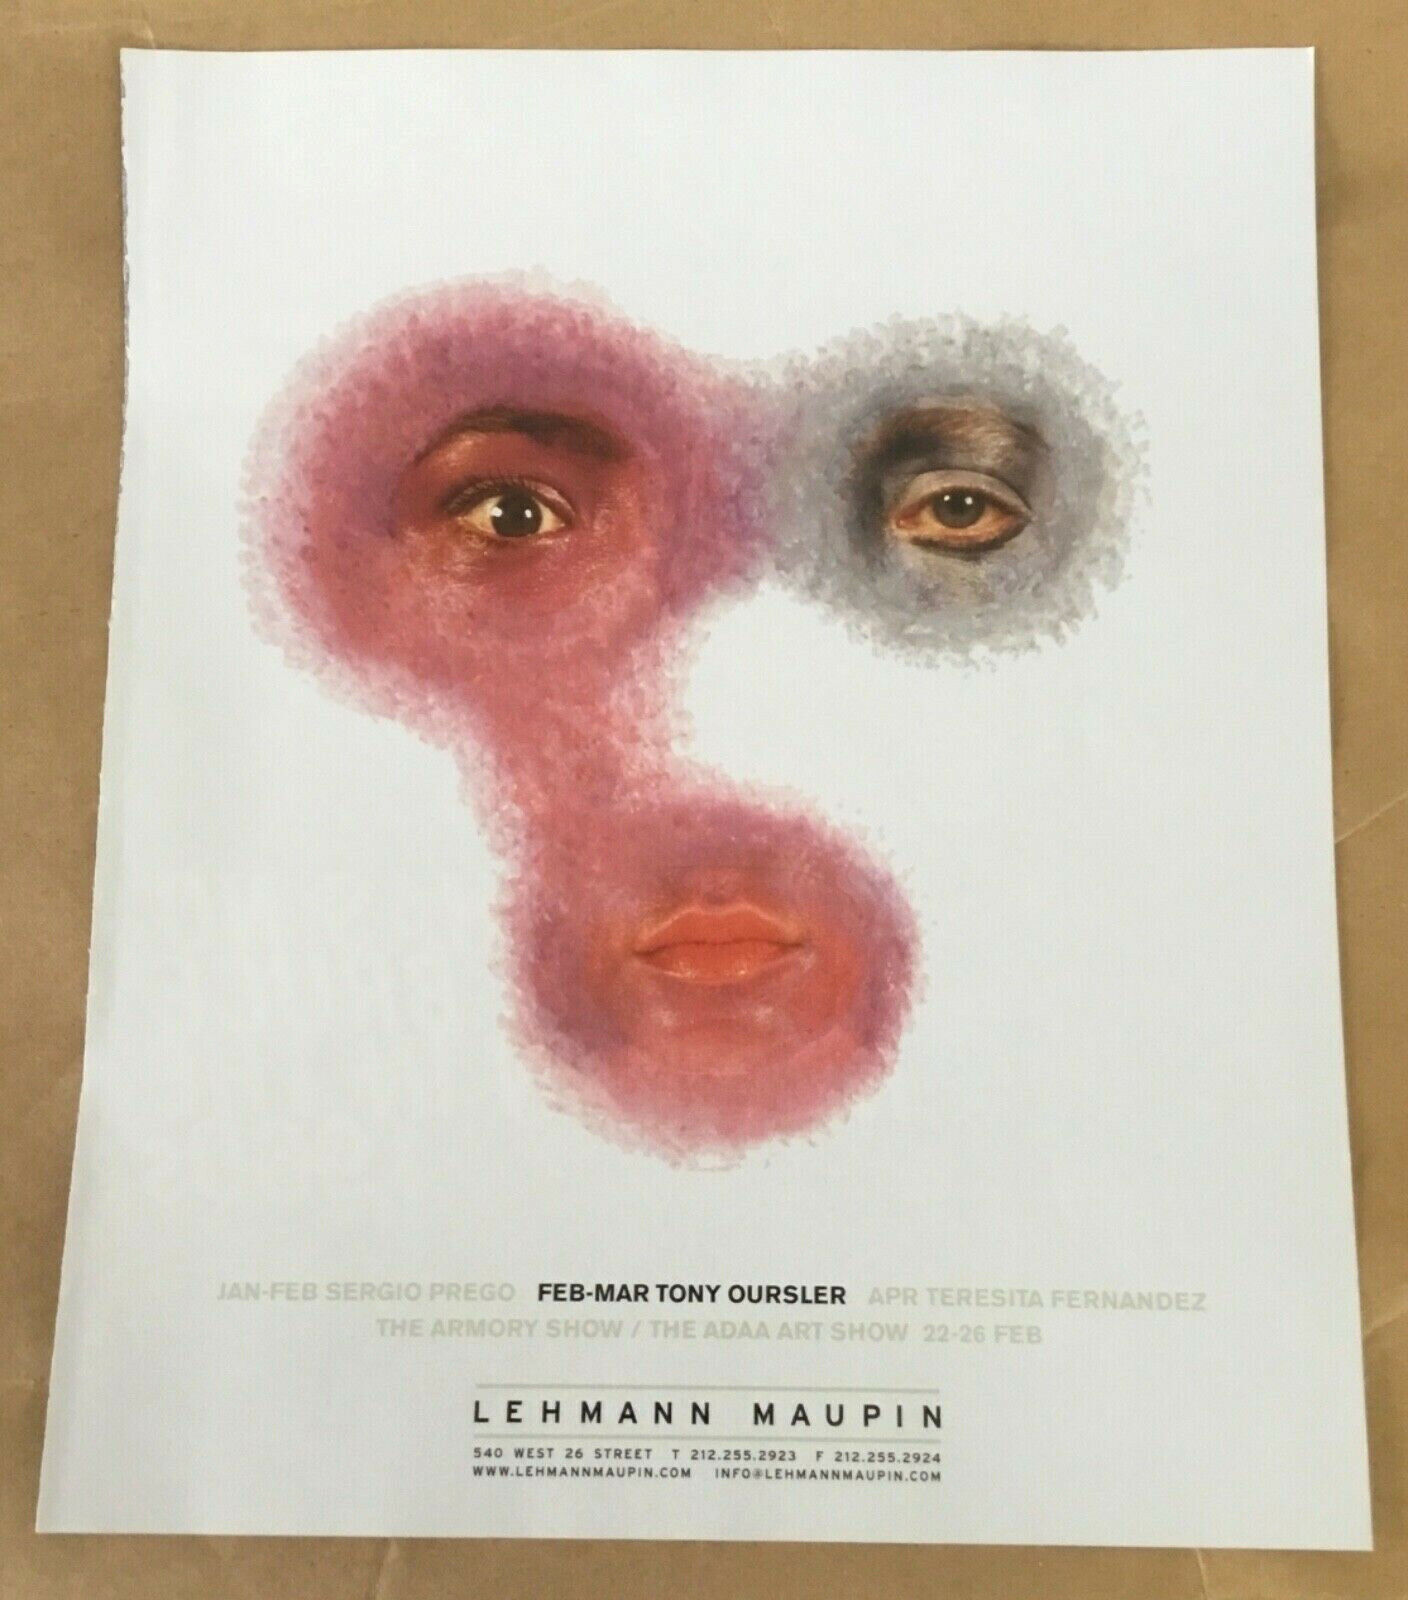 Tony Oursler Maupin gallery exhibition ad 2007 vintage modern art magazine print